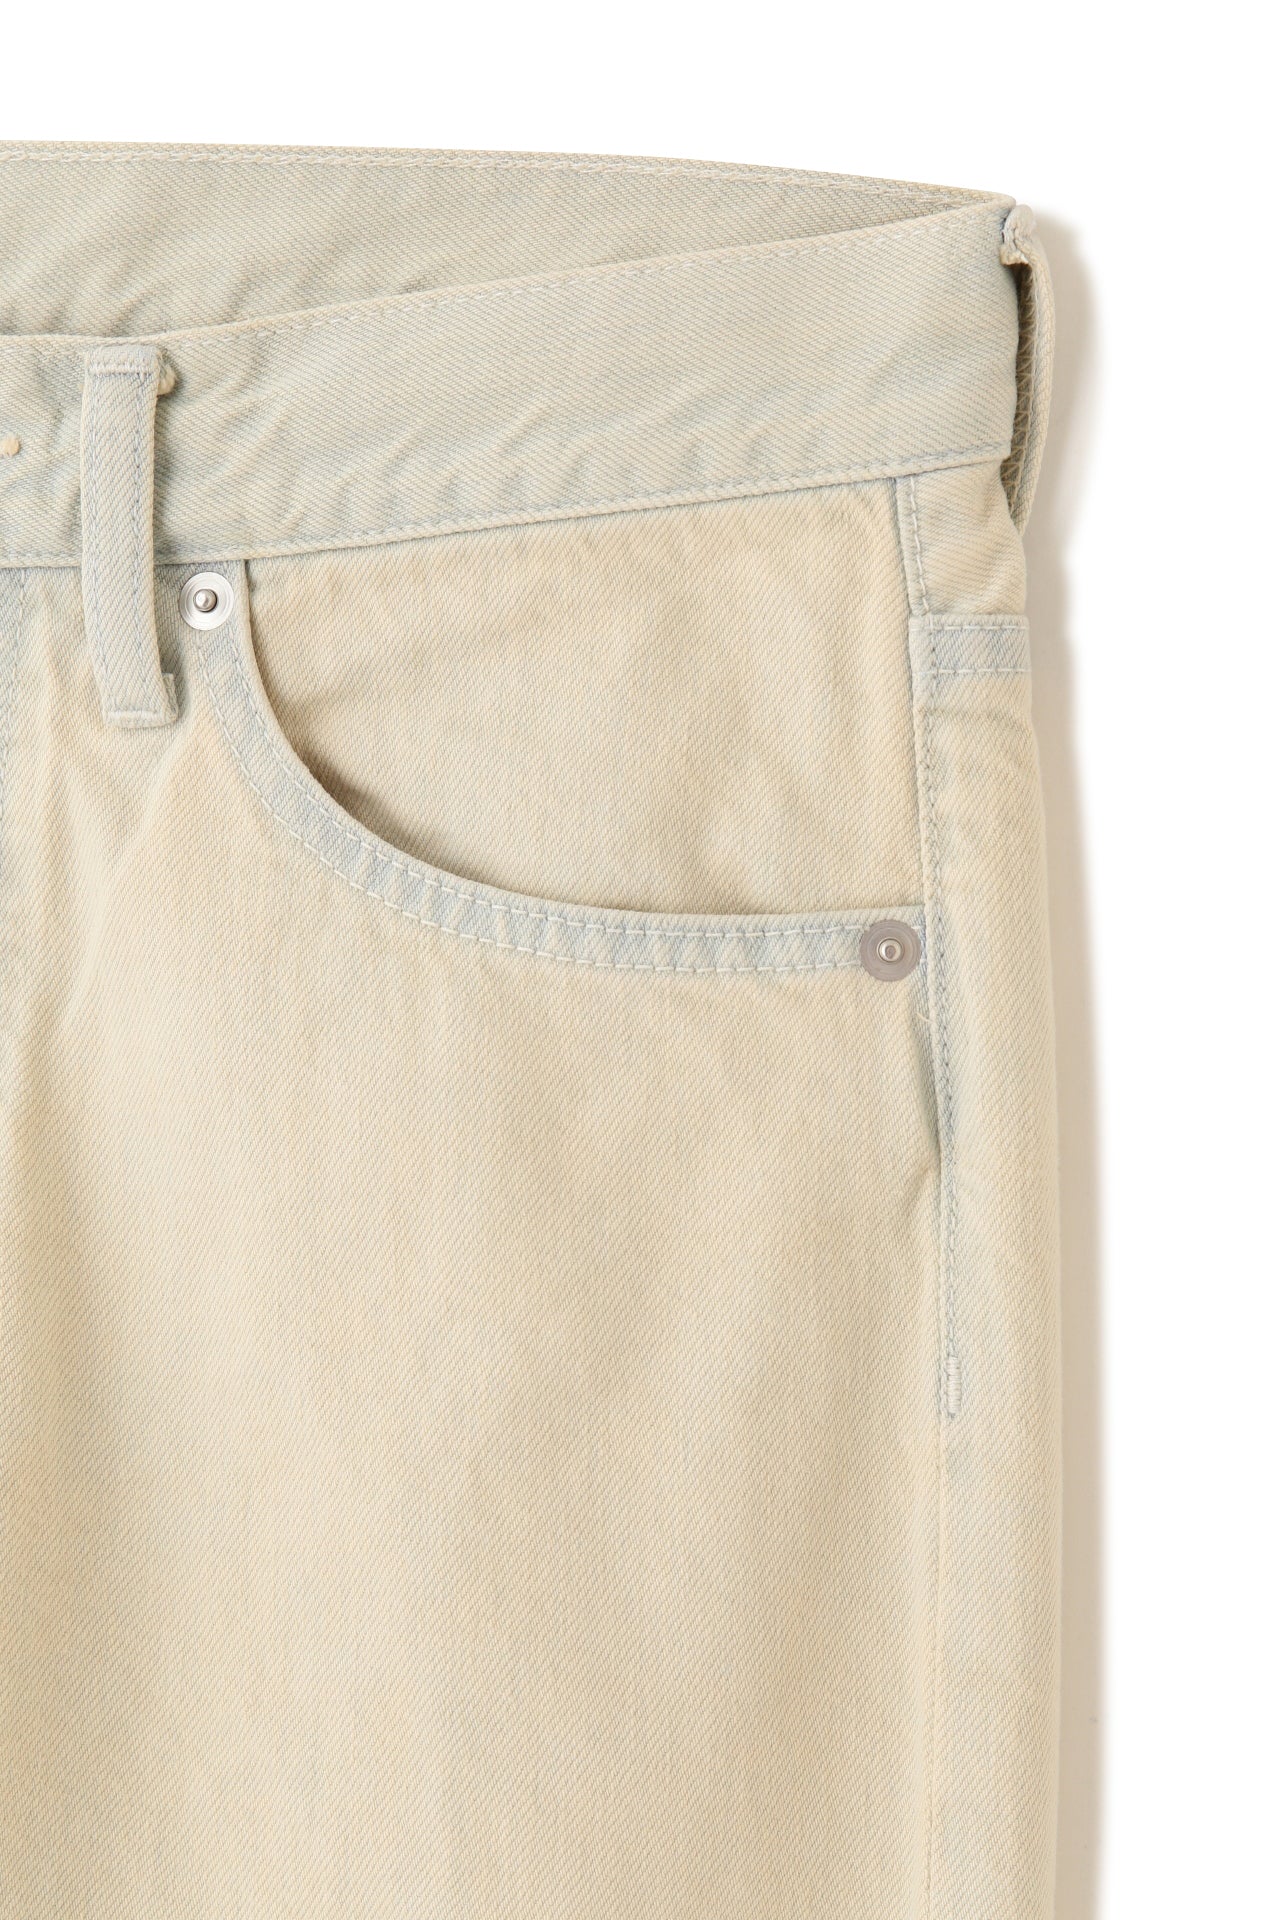 STRAIGHT JEANS - Garment dyed -